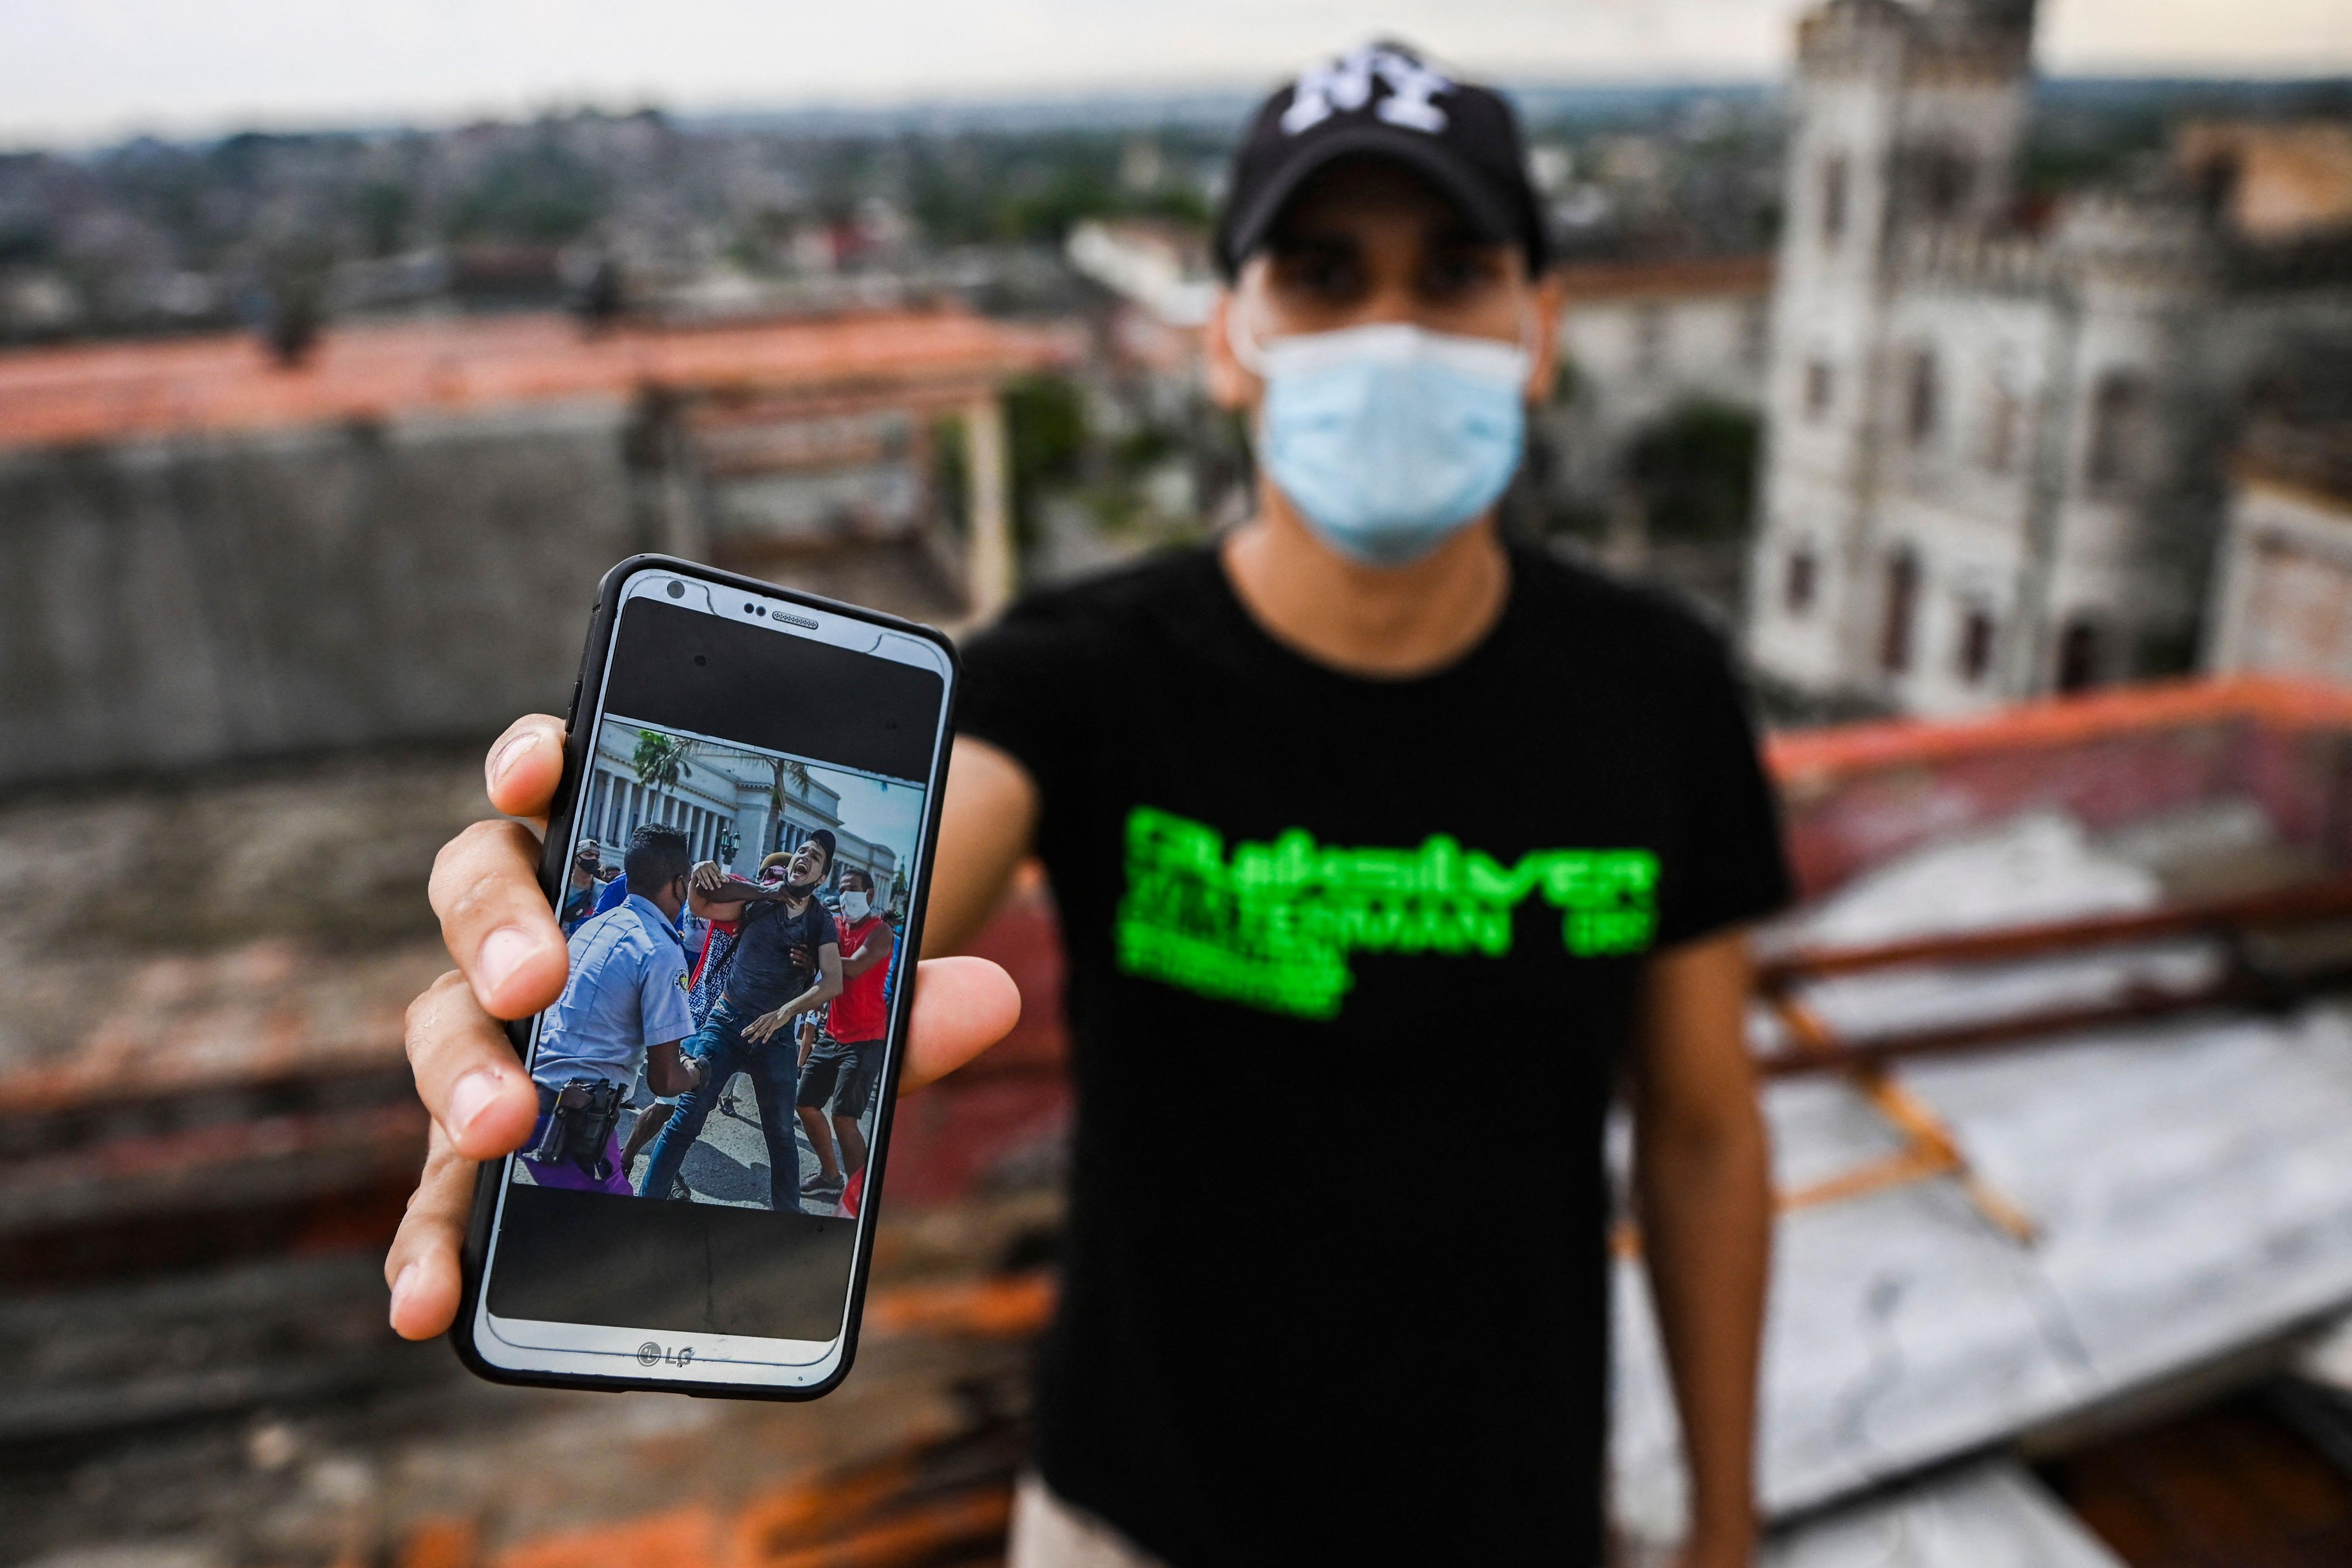 Cuban Rolando Remedios shows a photo of him being arrested during the July 11 protests on his mobile phone at his home in Havana, Cuba, on August 7, 2021.